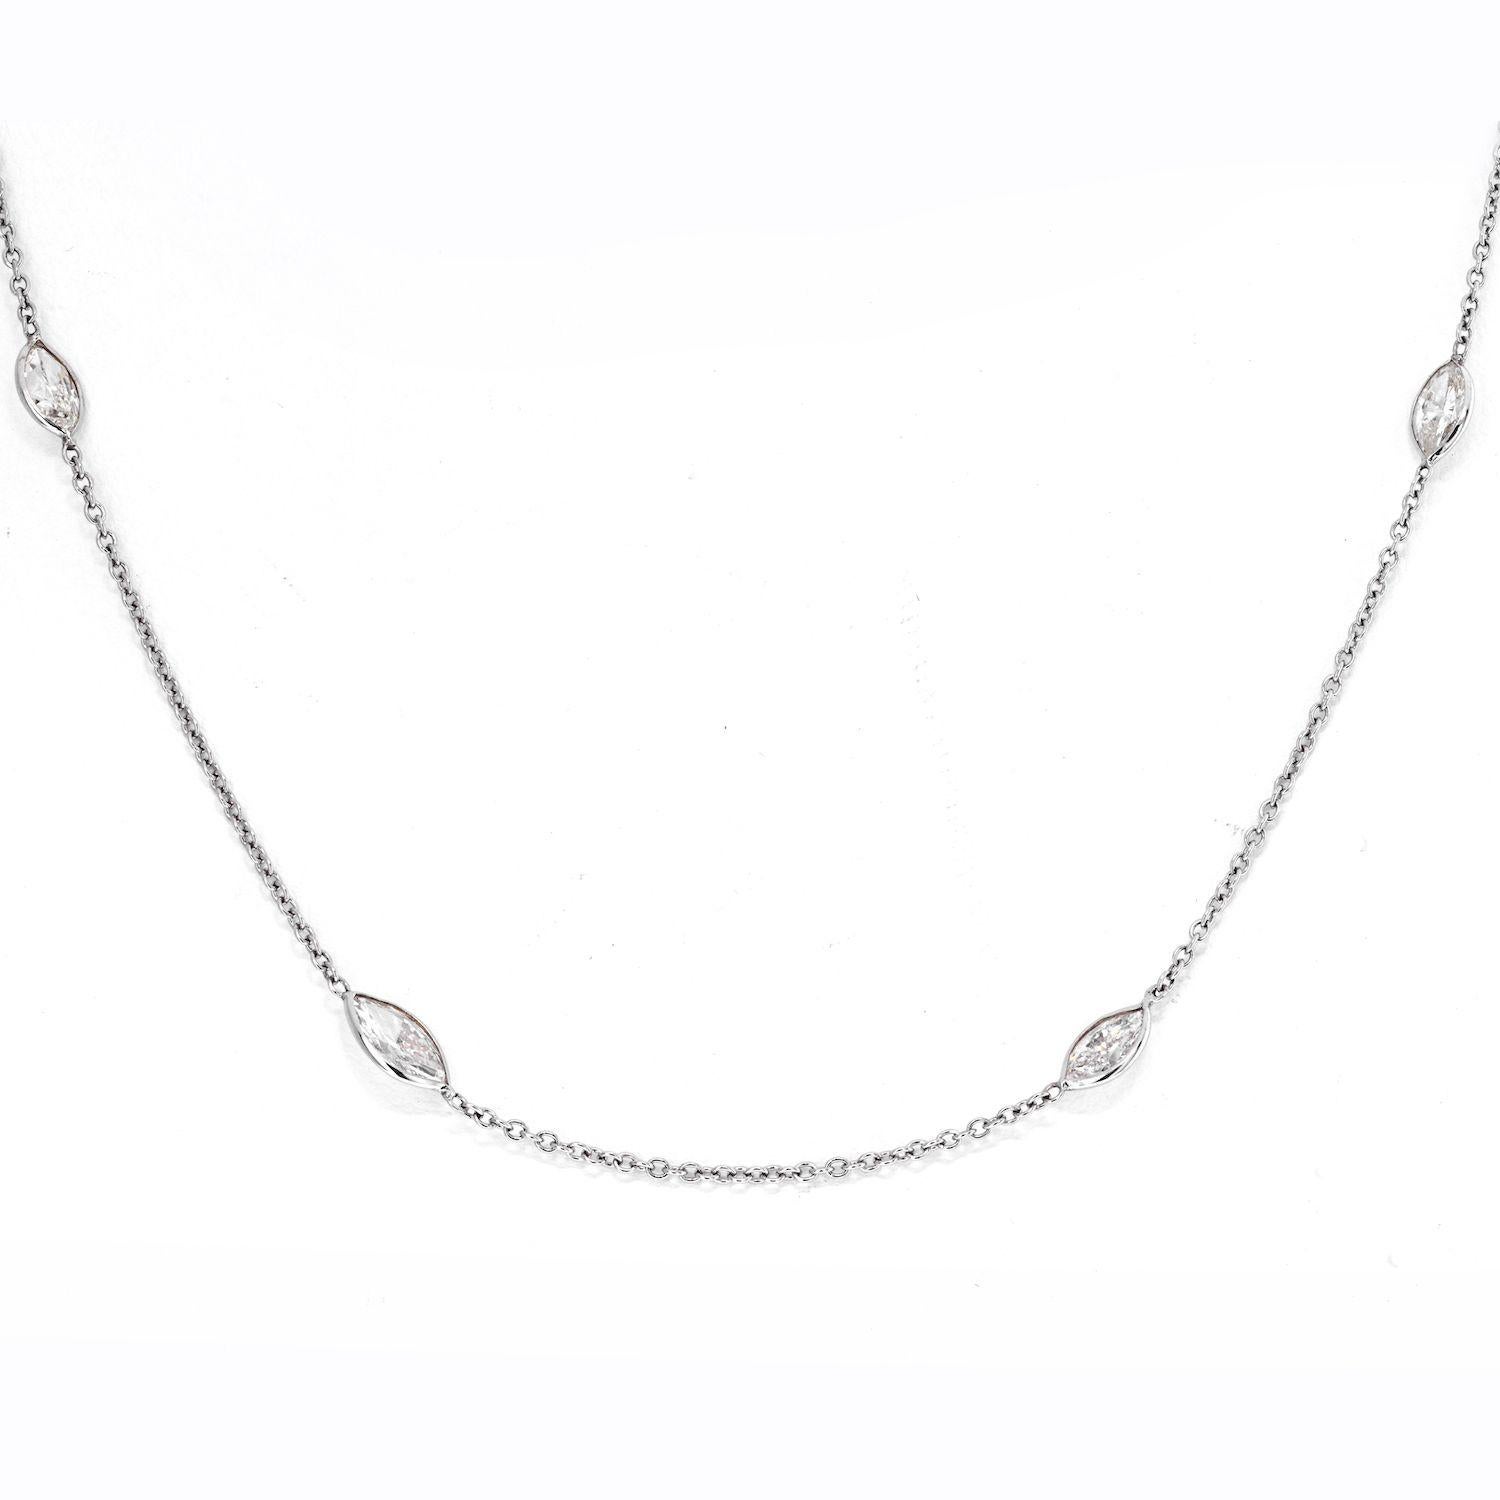 14K White Gold 5 Carat Marquise Diamond By The Yard Necklace.
9 Marquise Cuts: Total 5 Carats.
Length: 16 inches. 